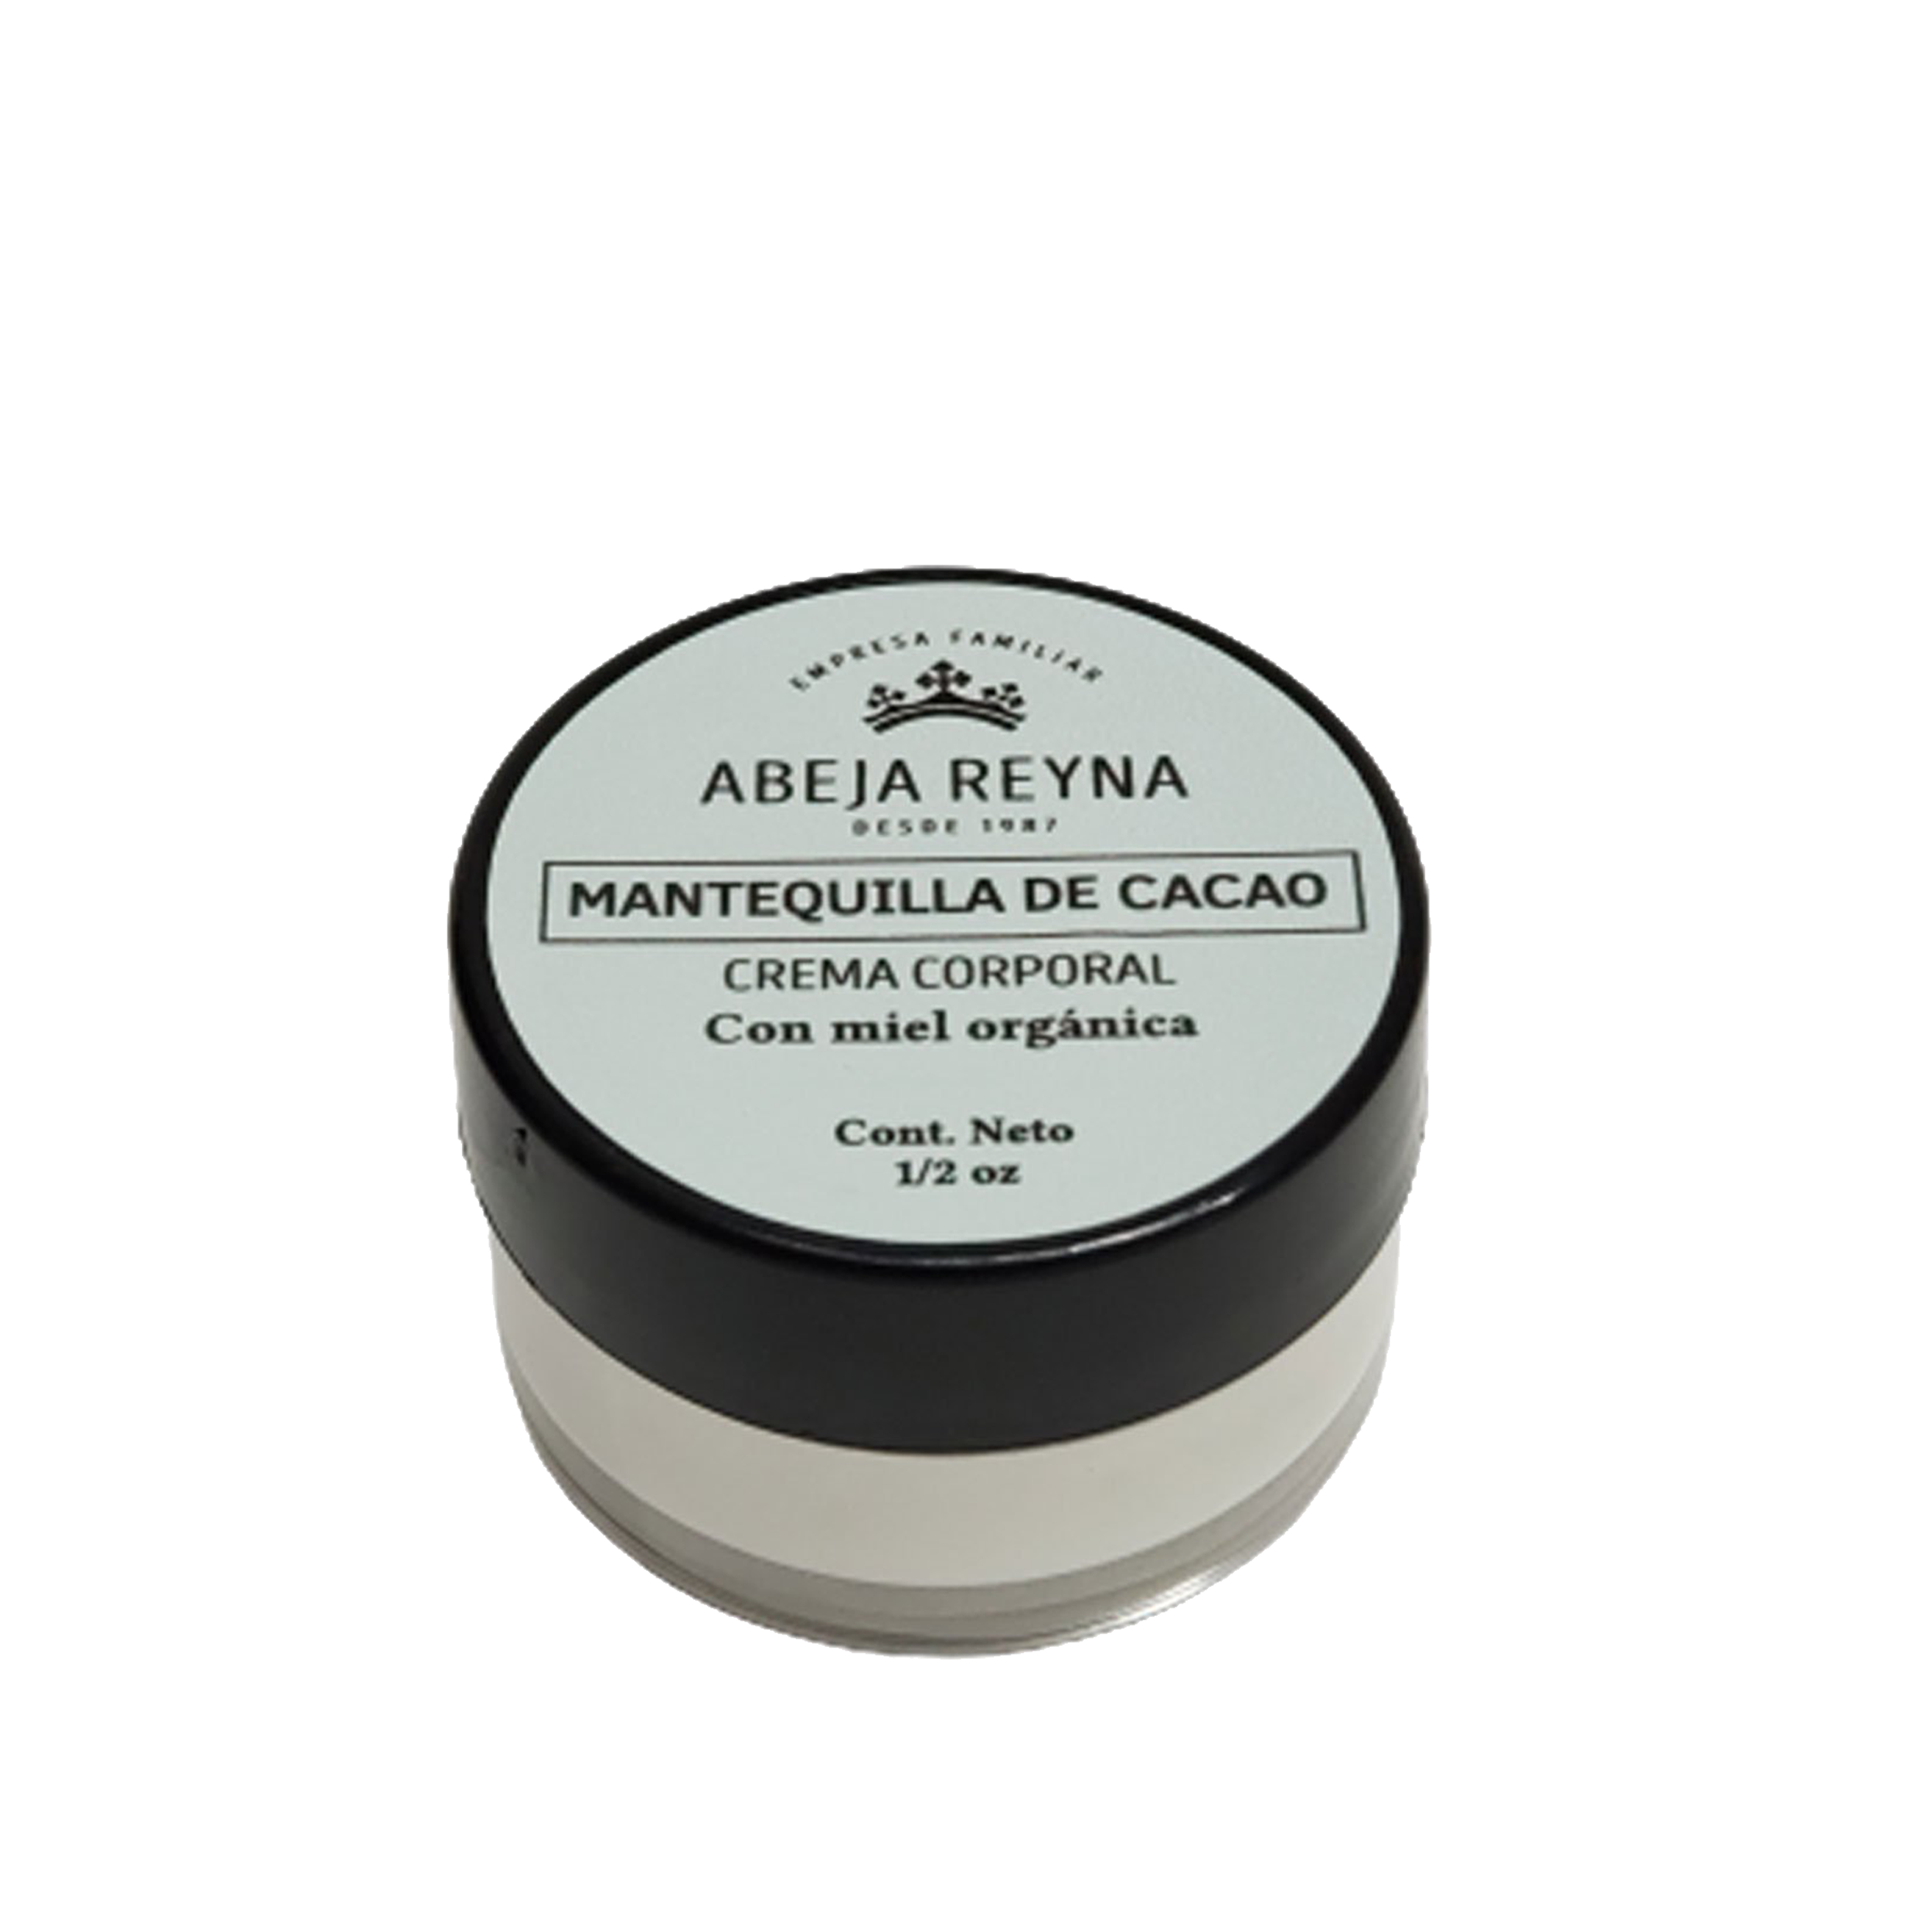 Abeja Reyna- Mantequilla corporal de cacao